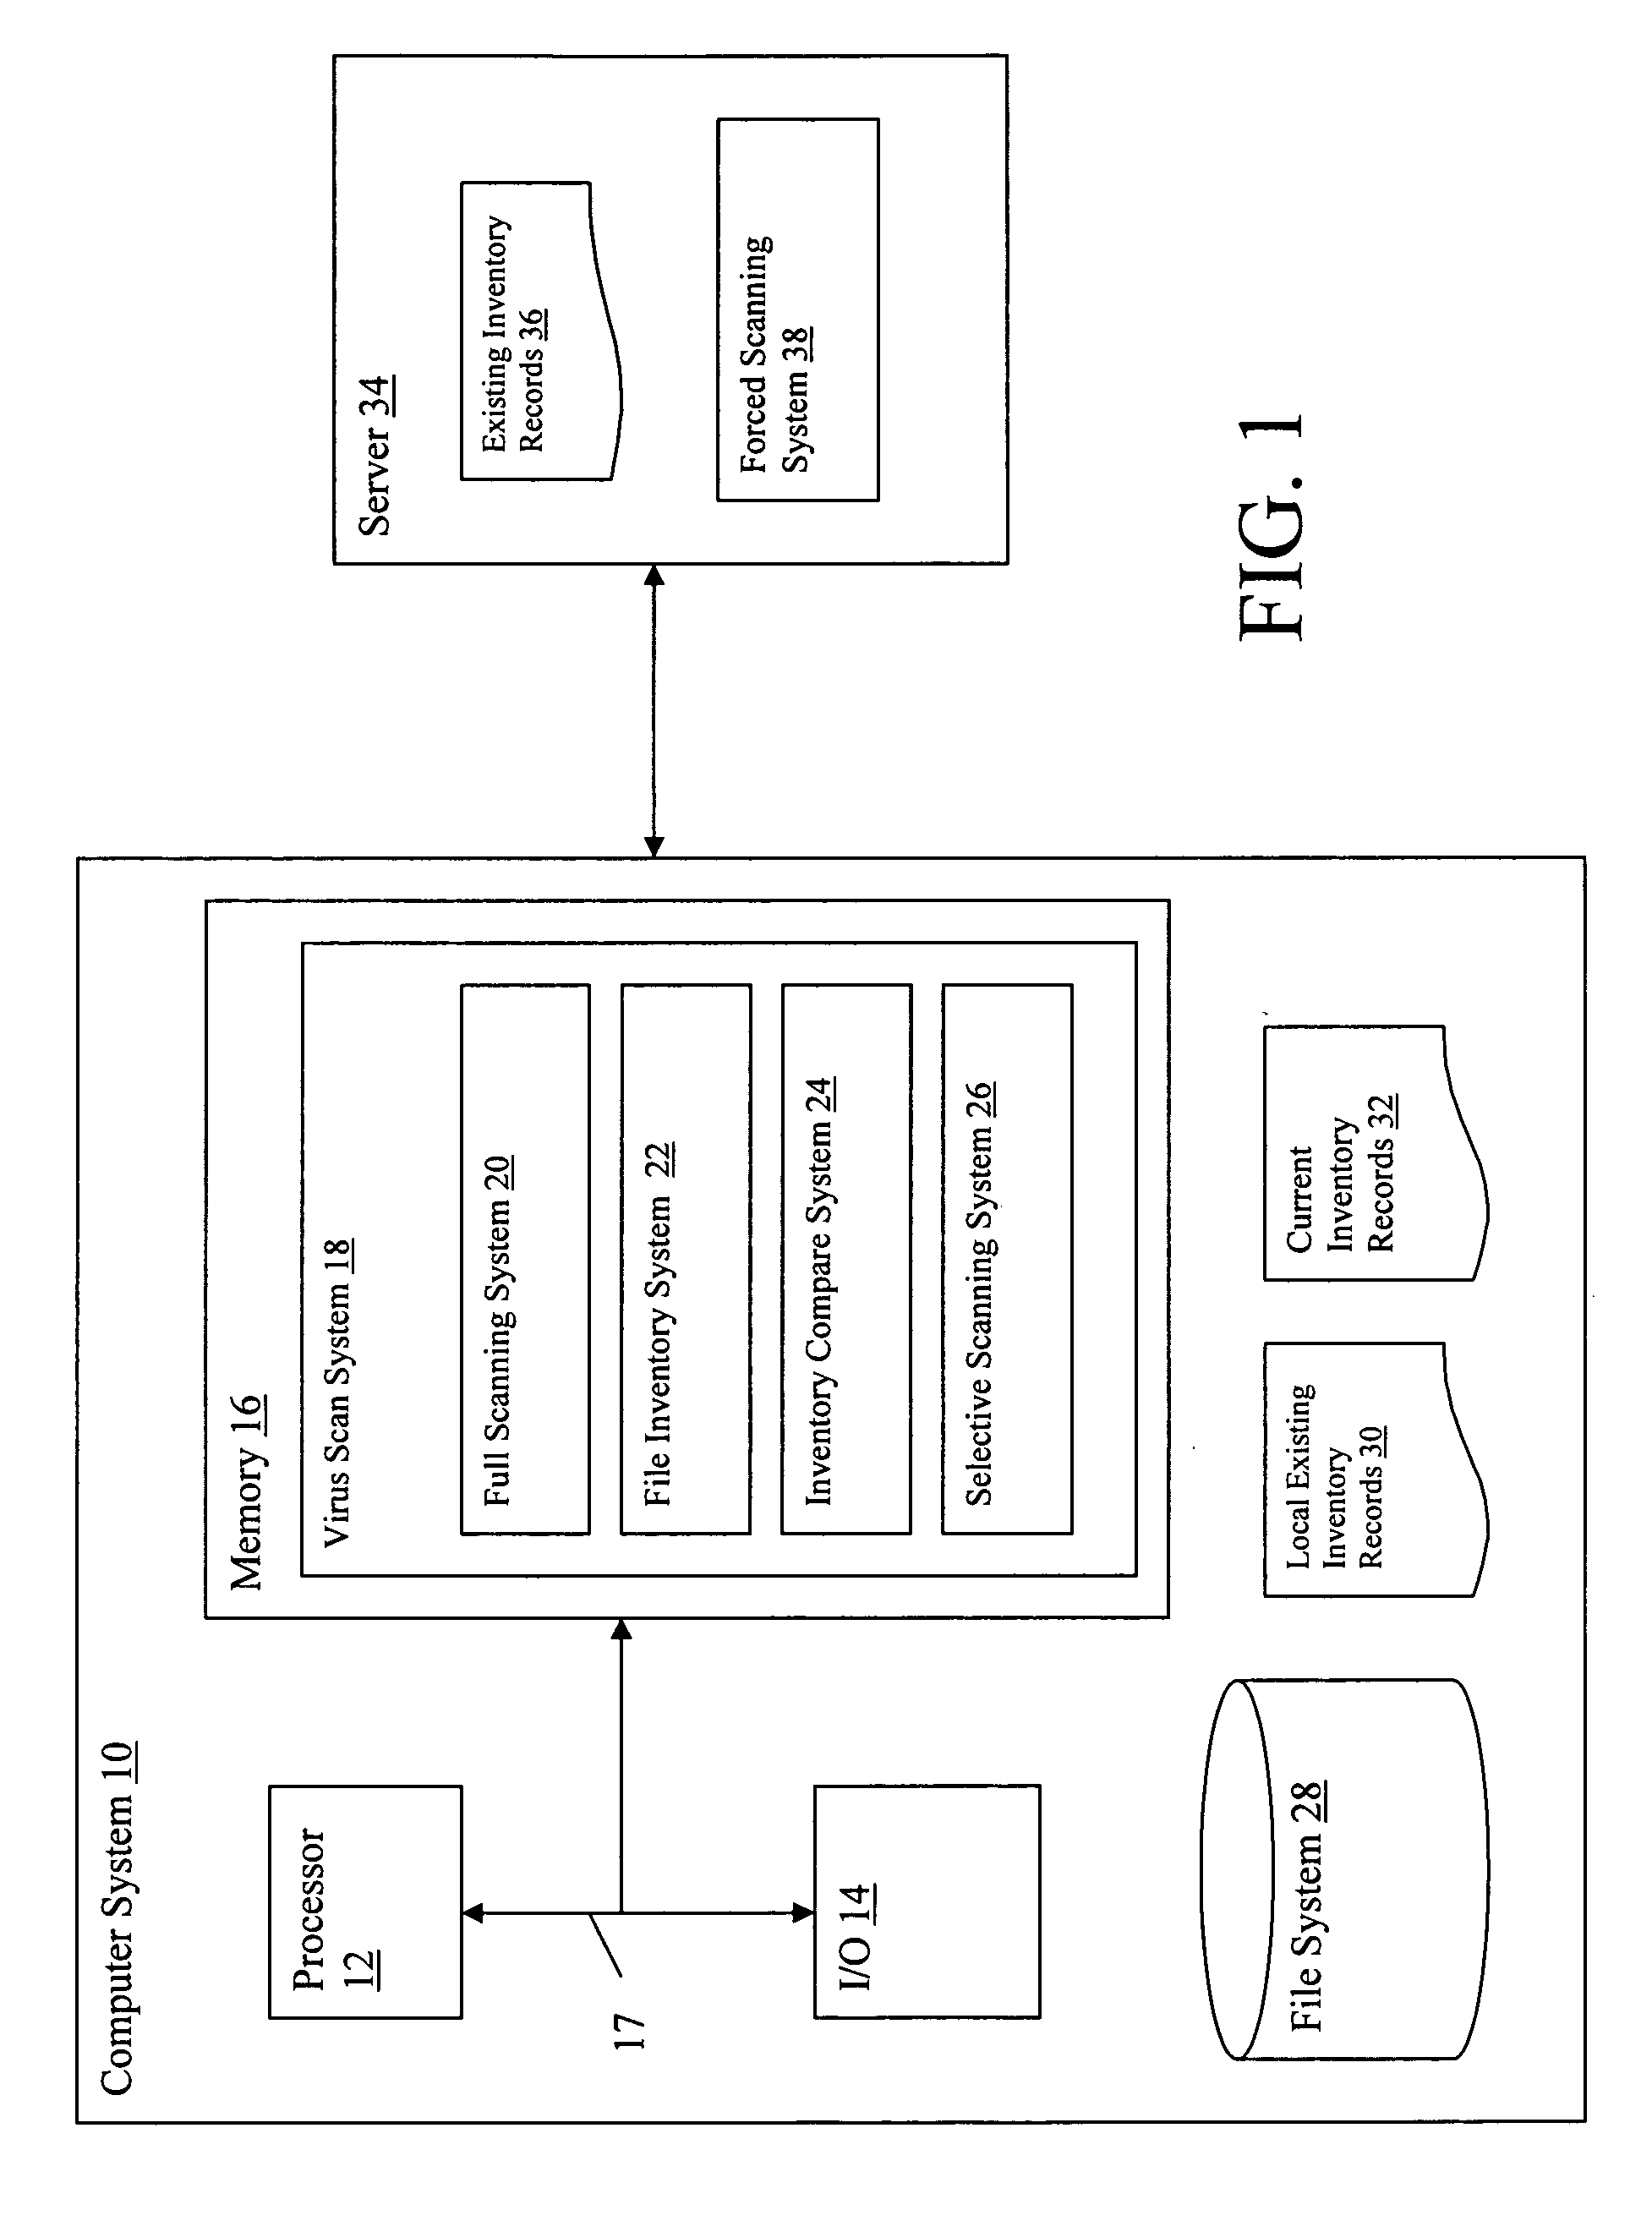 Selective virus scanning system and method